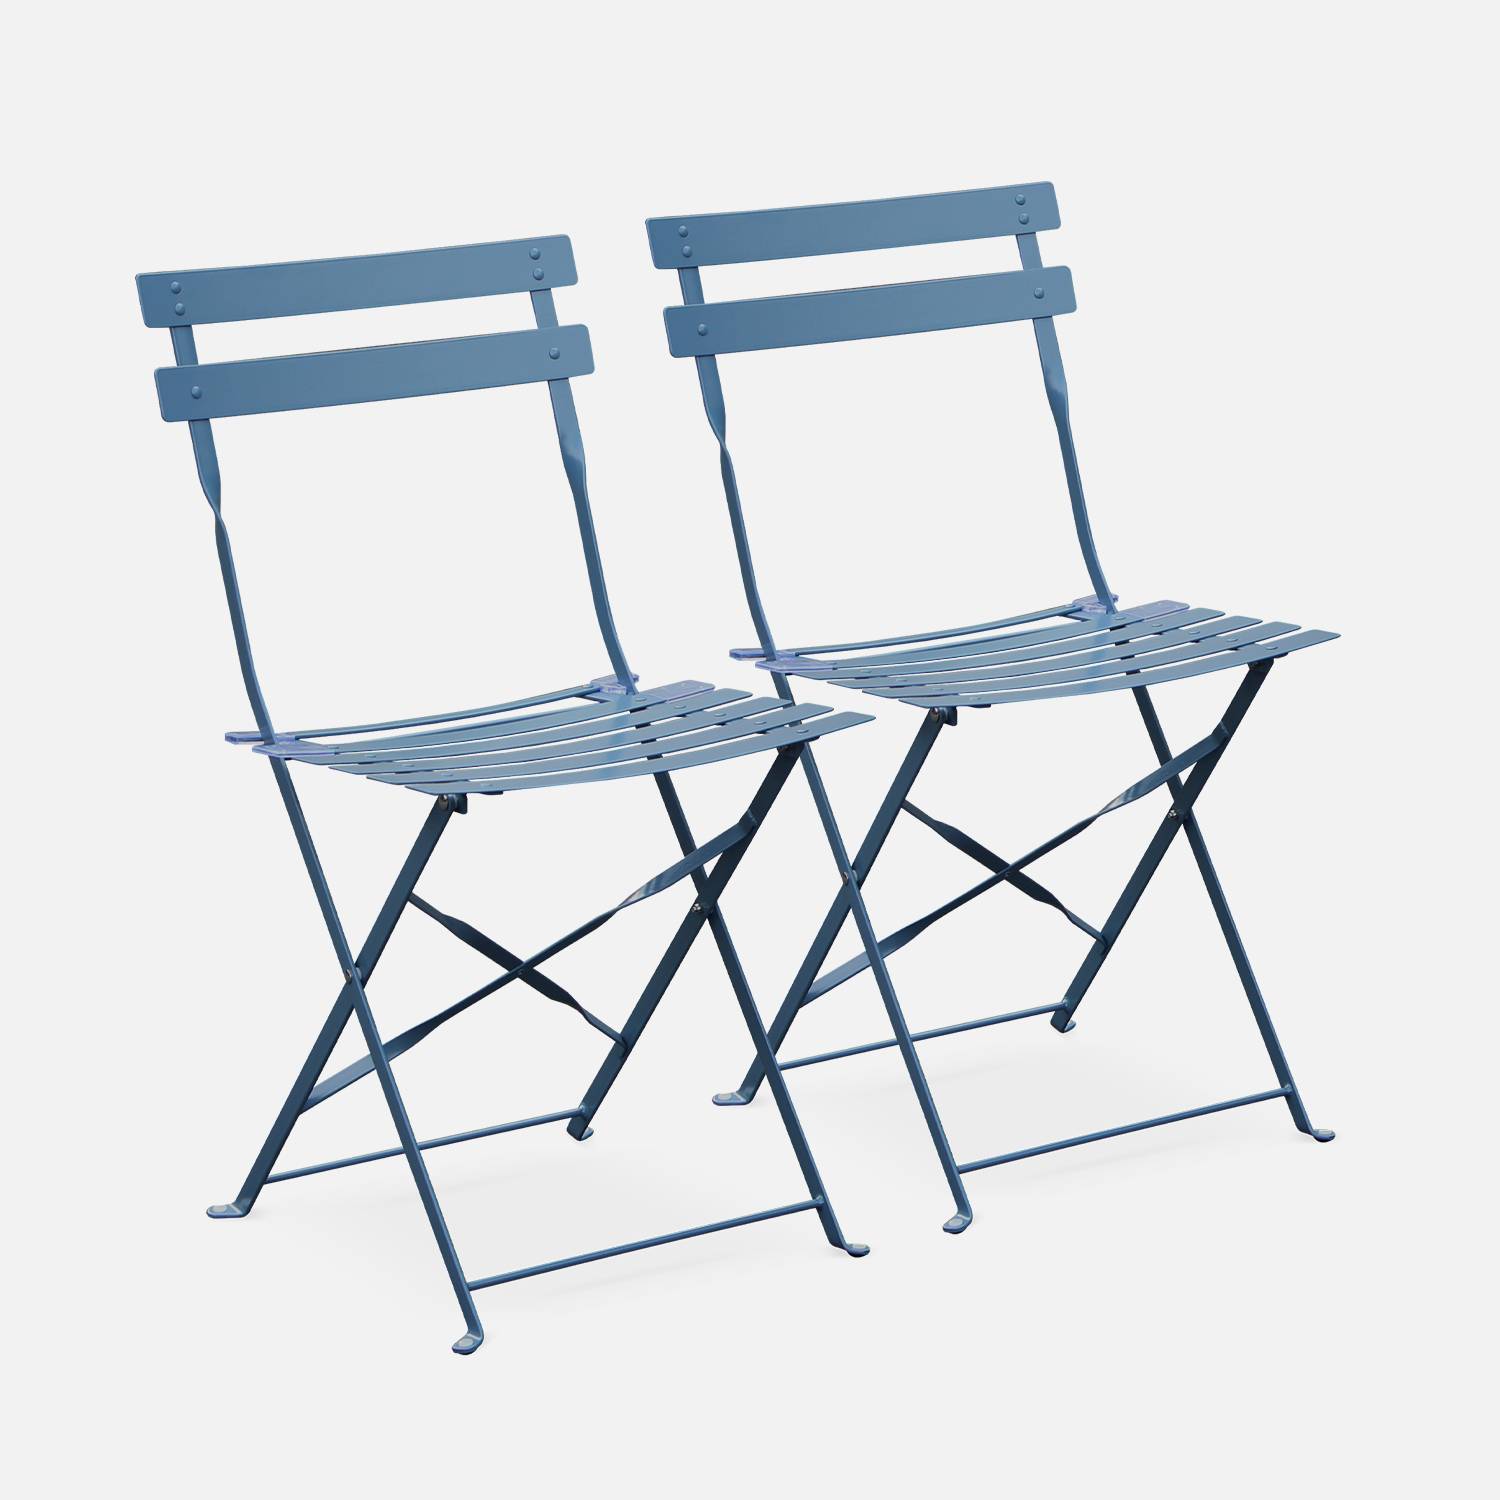 Set of 2 foldable bistro chairs - Emilia blue-grey - Thermo-lacquered steel Photo3